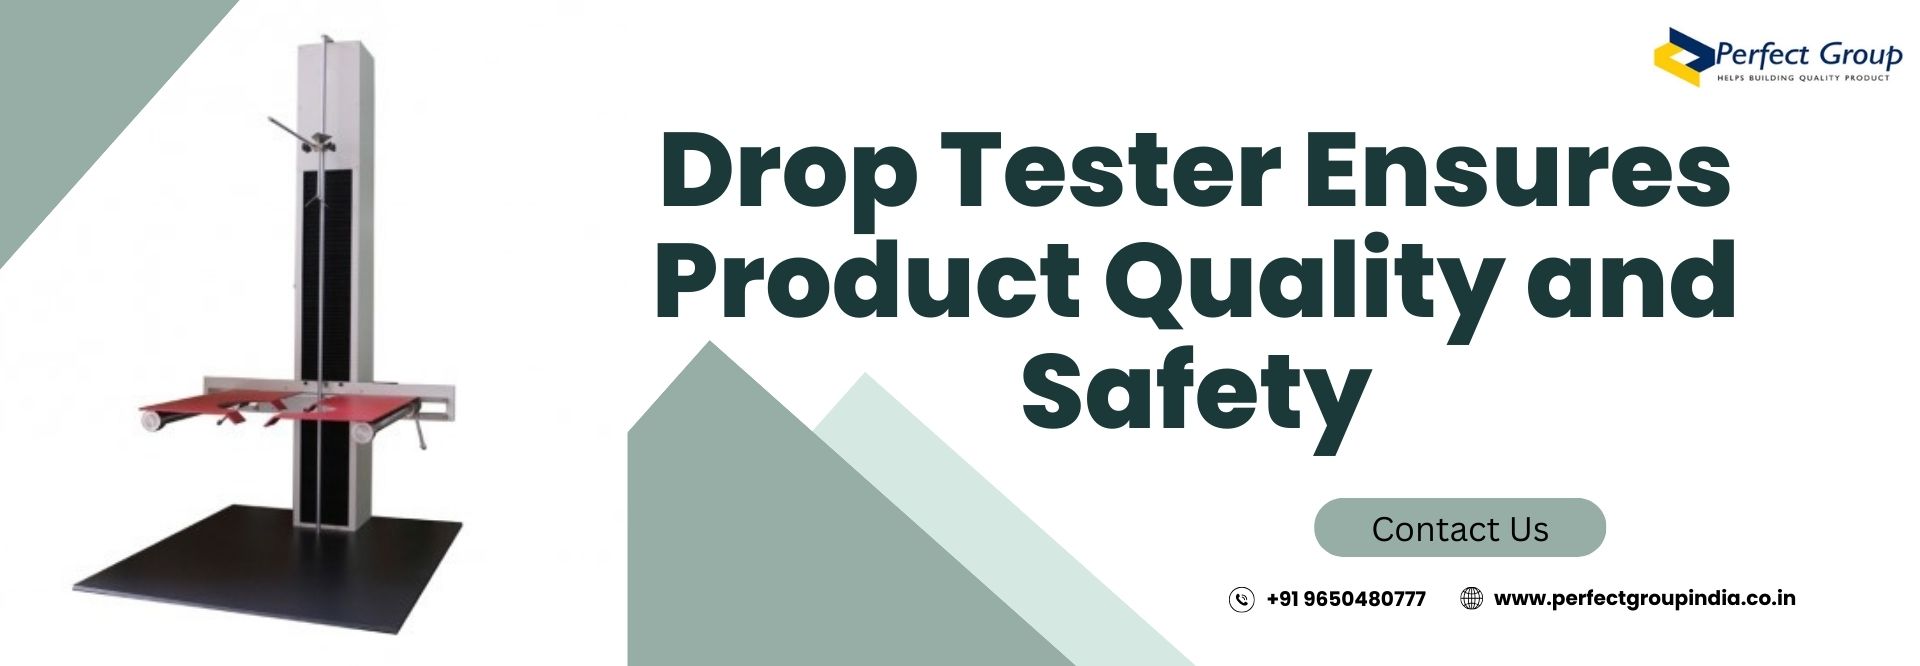 Drop Tester Ensures Product Quality and Safety